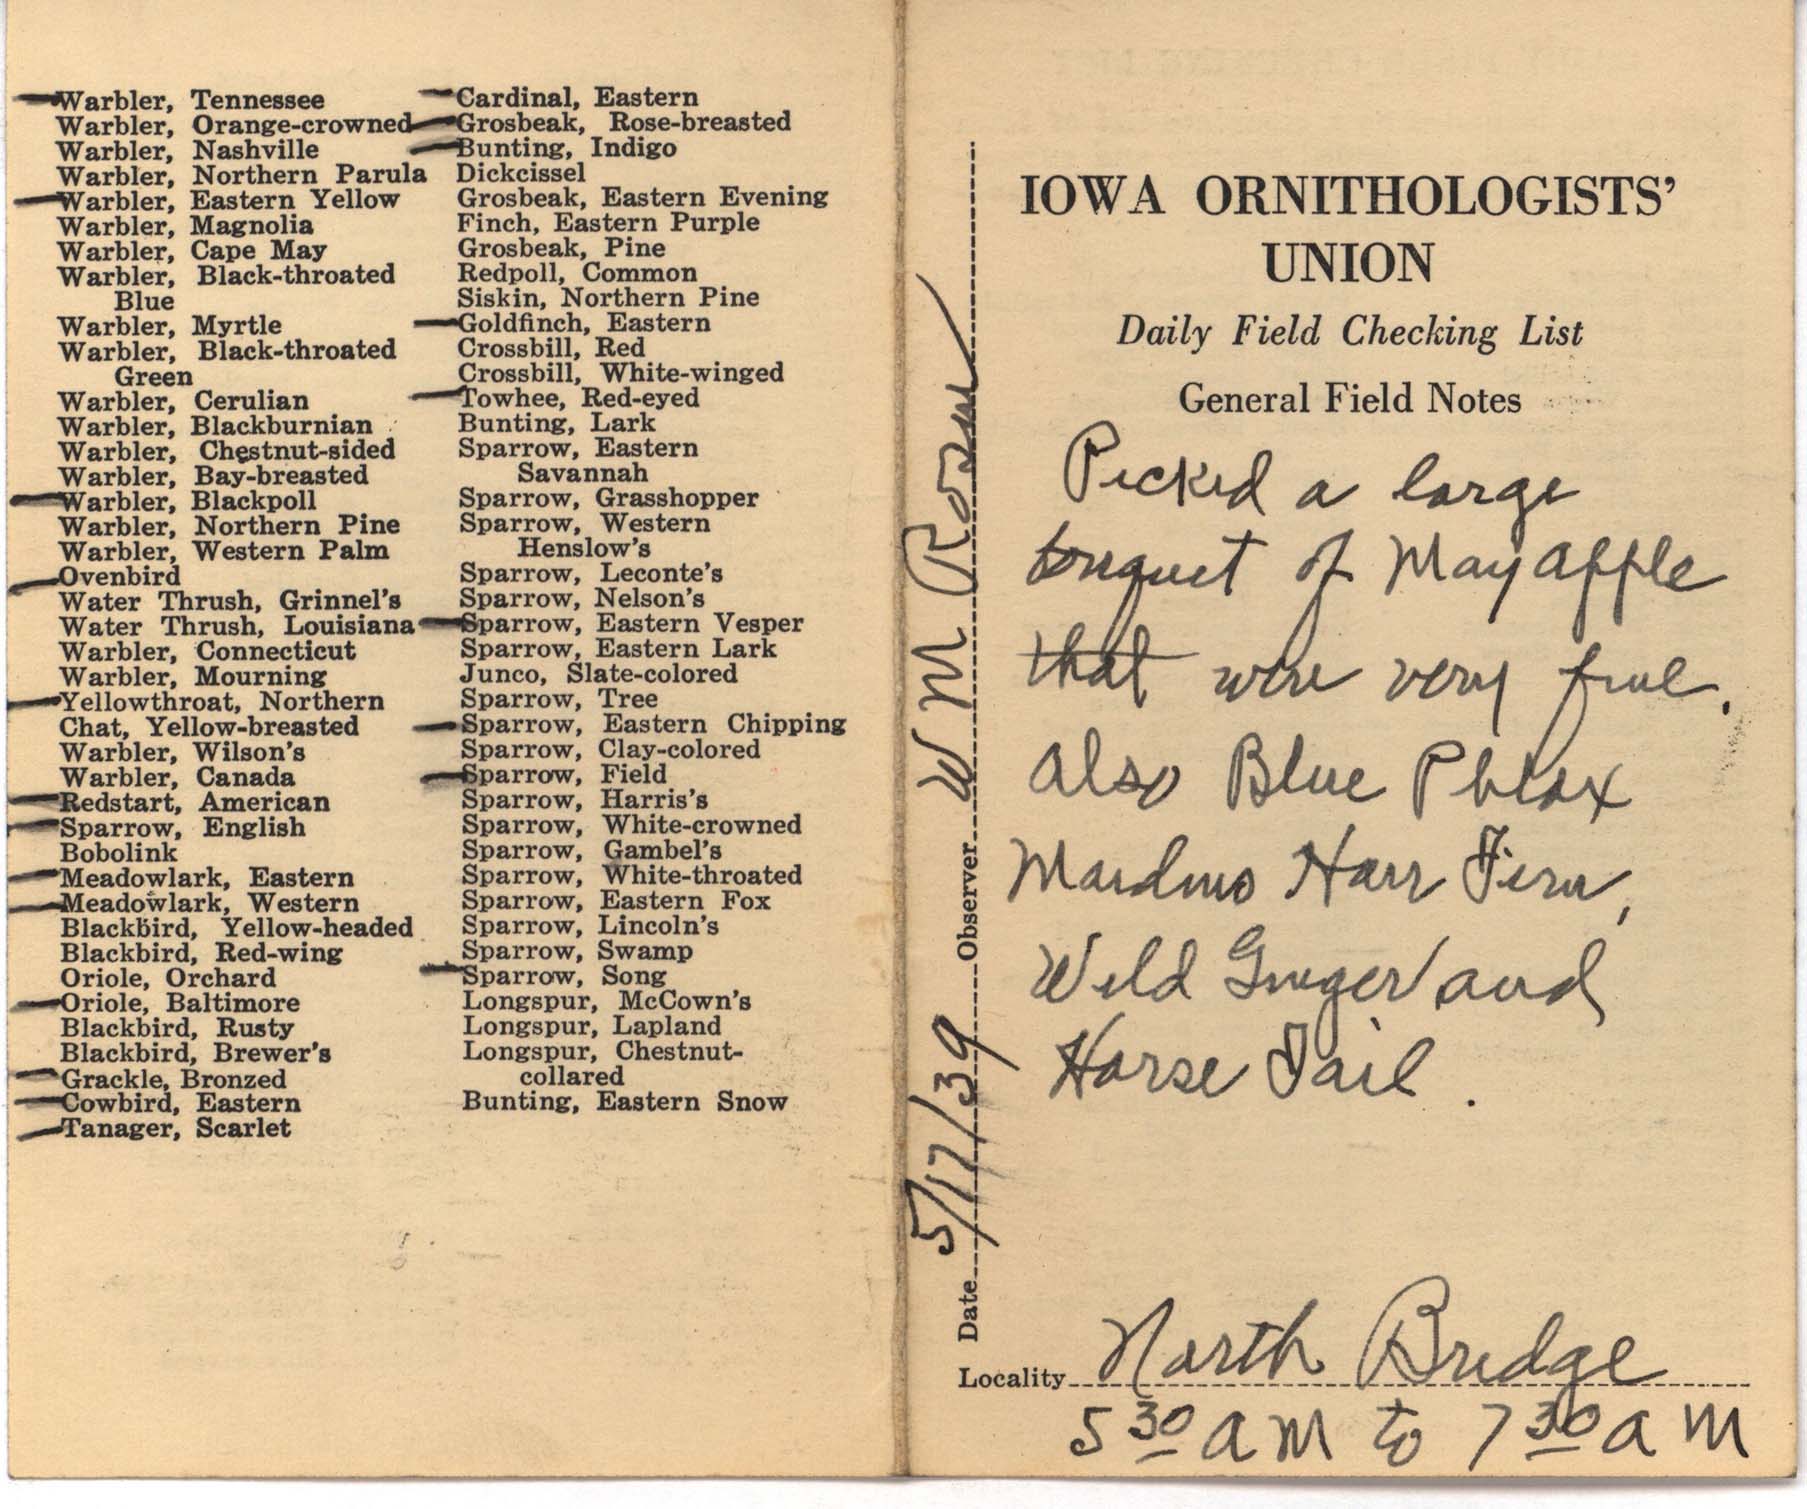 Daily field checking list by Walter Rosene, May 17, 1939